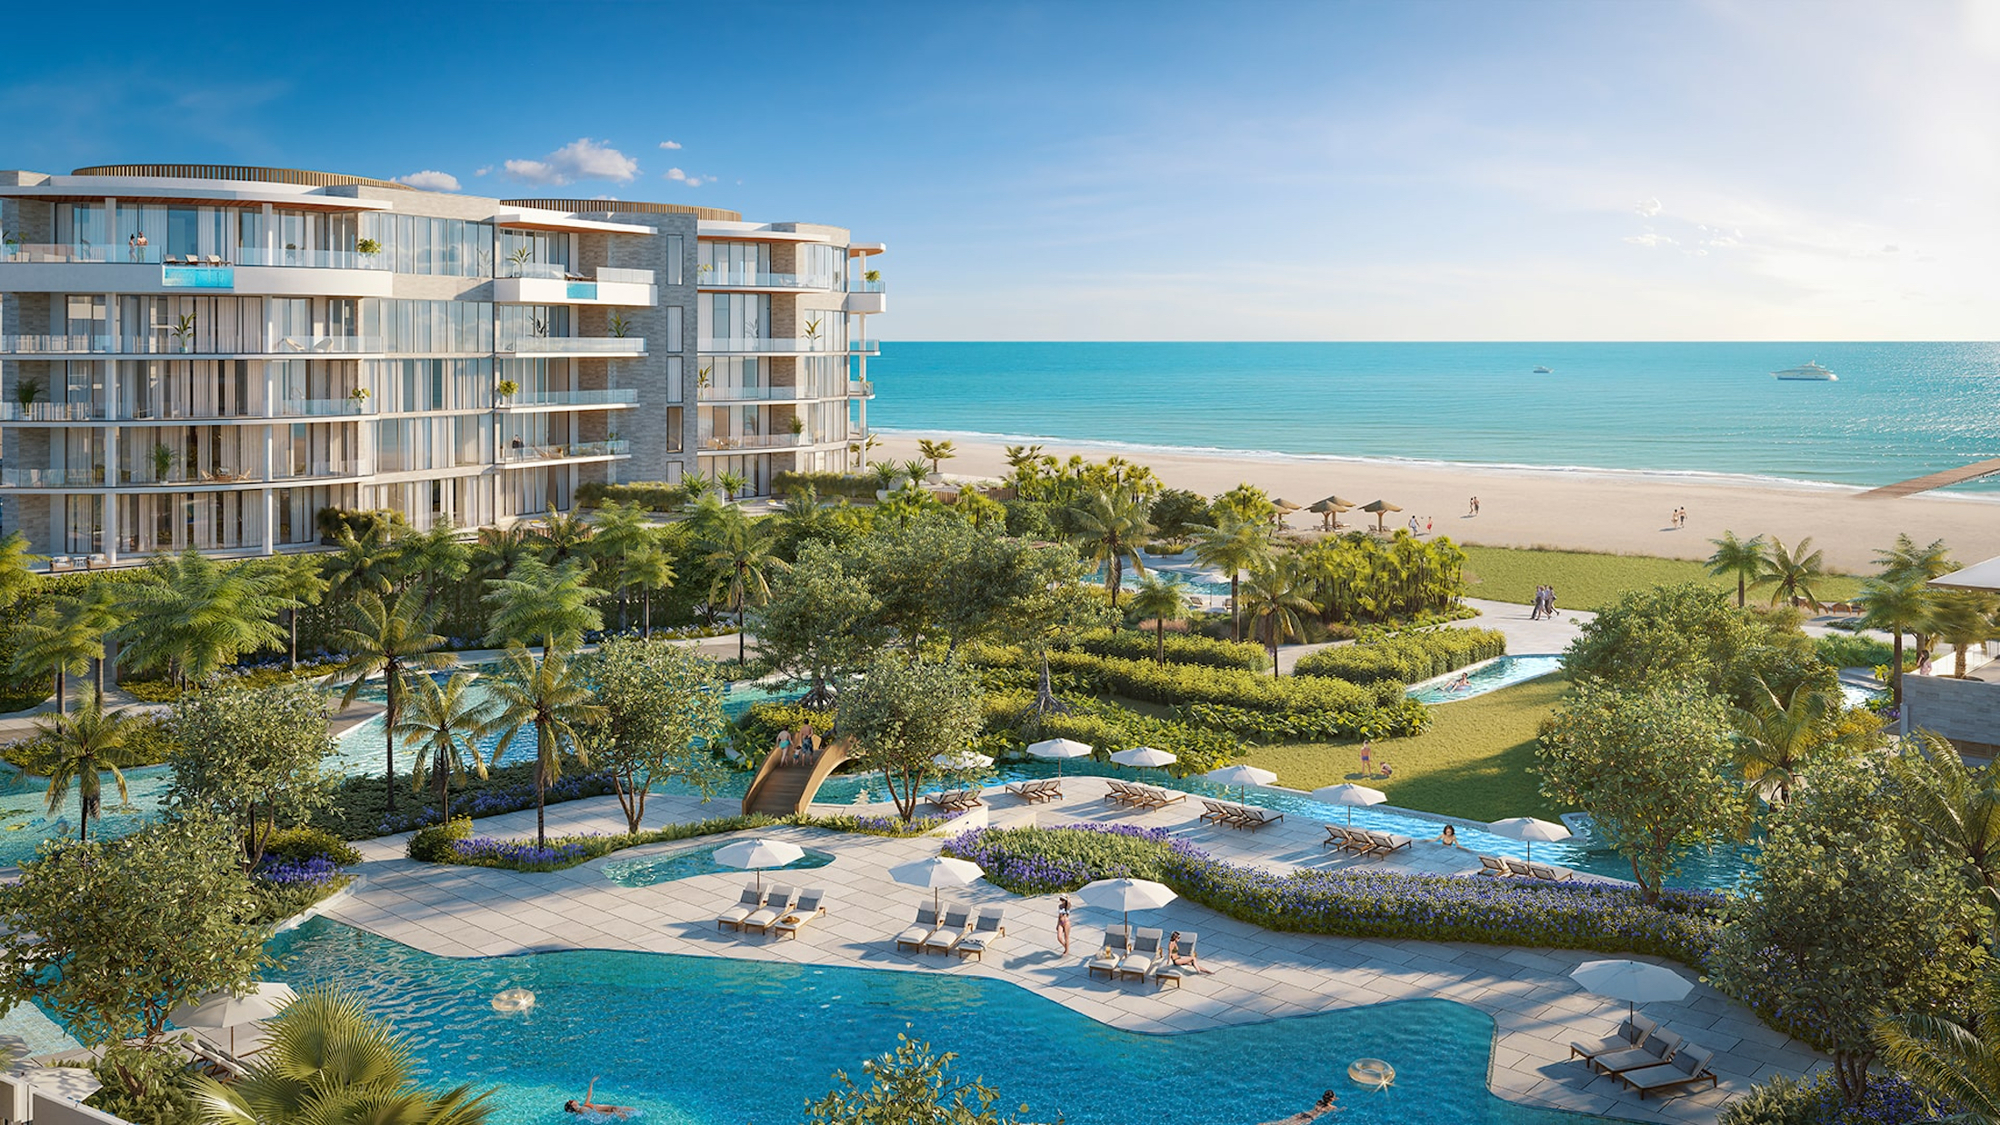 As of Oct. 7, more than half of the 69 condominiums at the planned St. Regis Hotel and Residences on Longboat Key have been reserved with deposits.